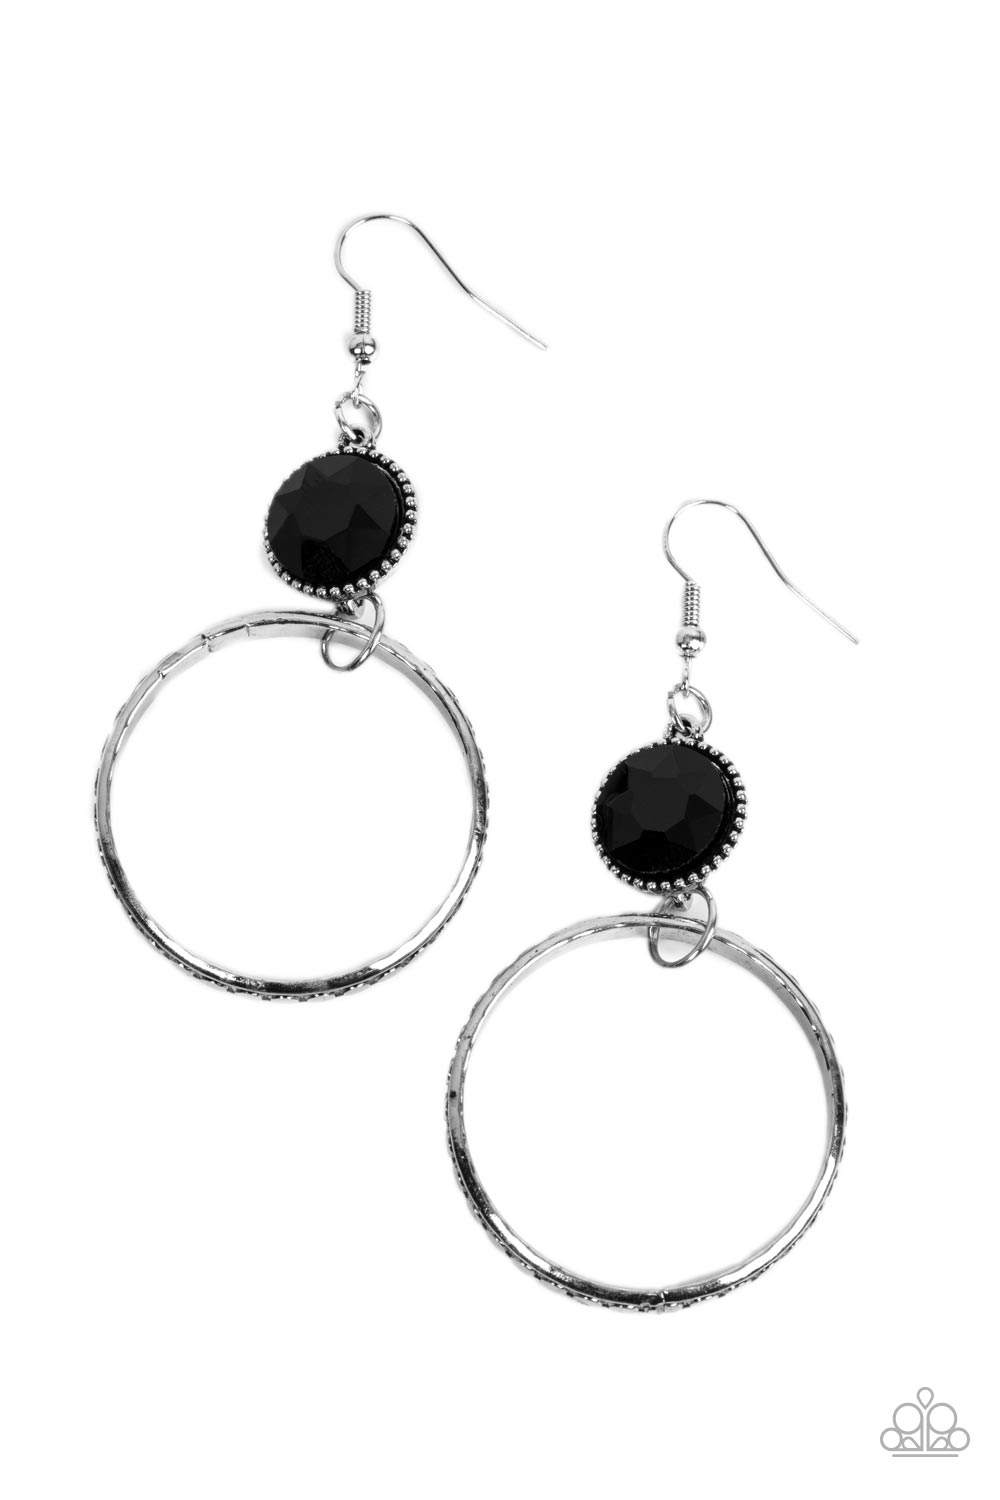 Standalone Sparkle - Black and Silver Earrings - Paparazzi Accessories - The outer edge of a silver ring is stamped with a flattened dot motif as it swings below a dramatic black rhinestone that sparkles inside a daintily dotted antiqued silver frame, creating an upscale, edgy modern lure. Earring attaches to a standard fishhook fitting. Sold as one pair of earrings.